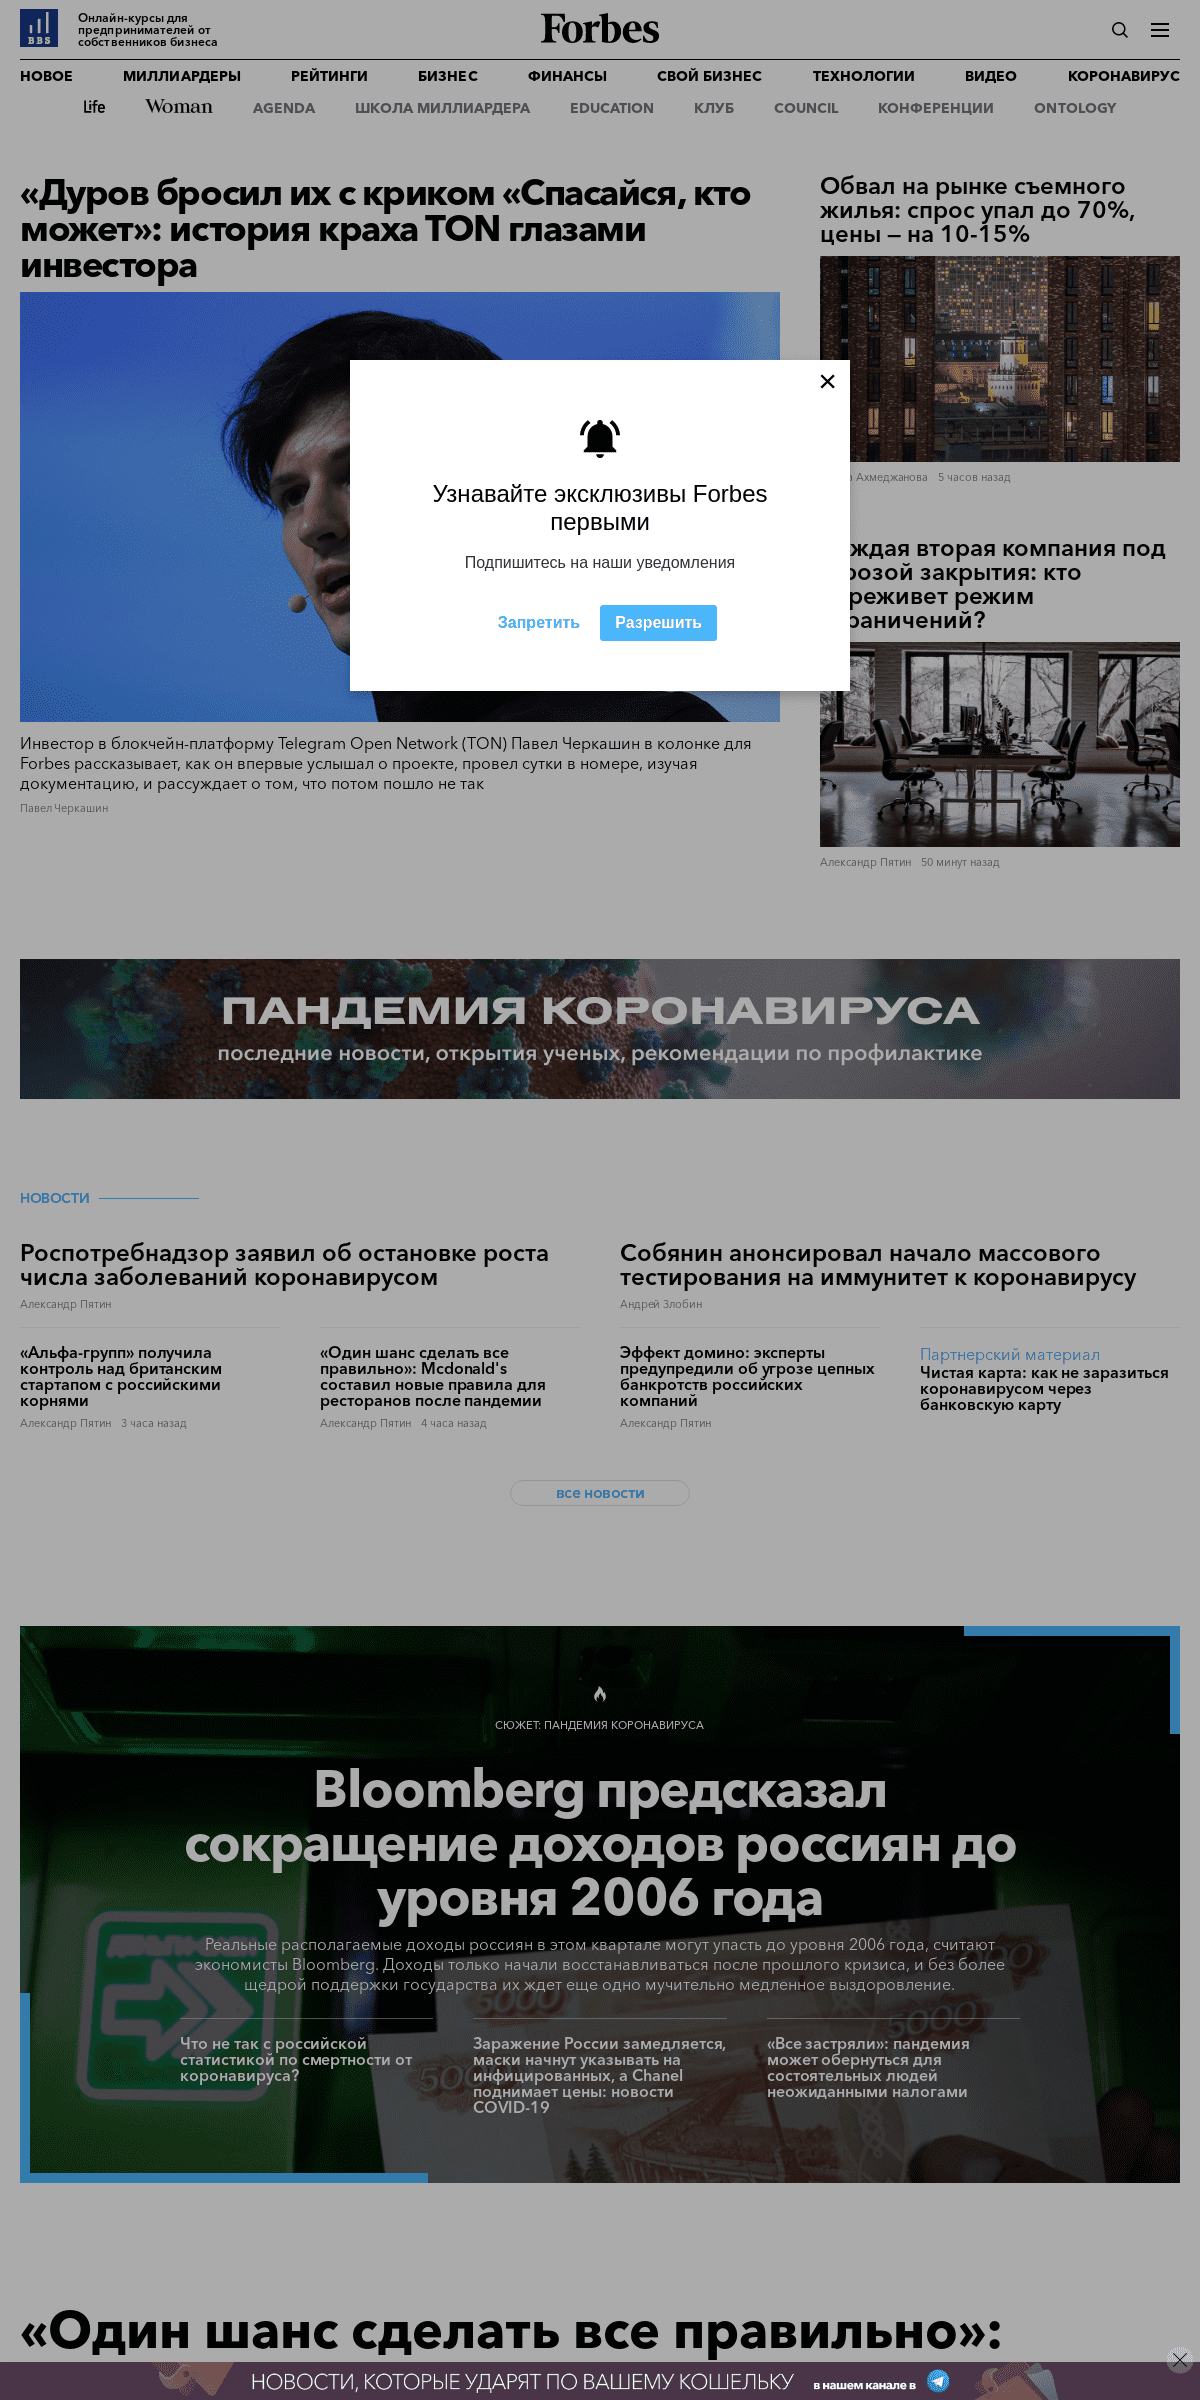 A complete backup of forbesrussia.ru